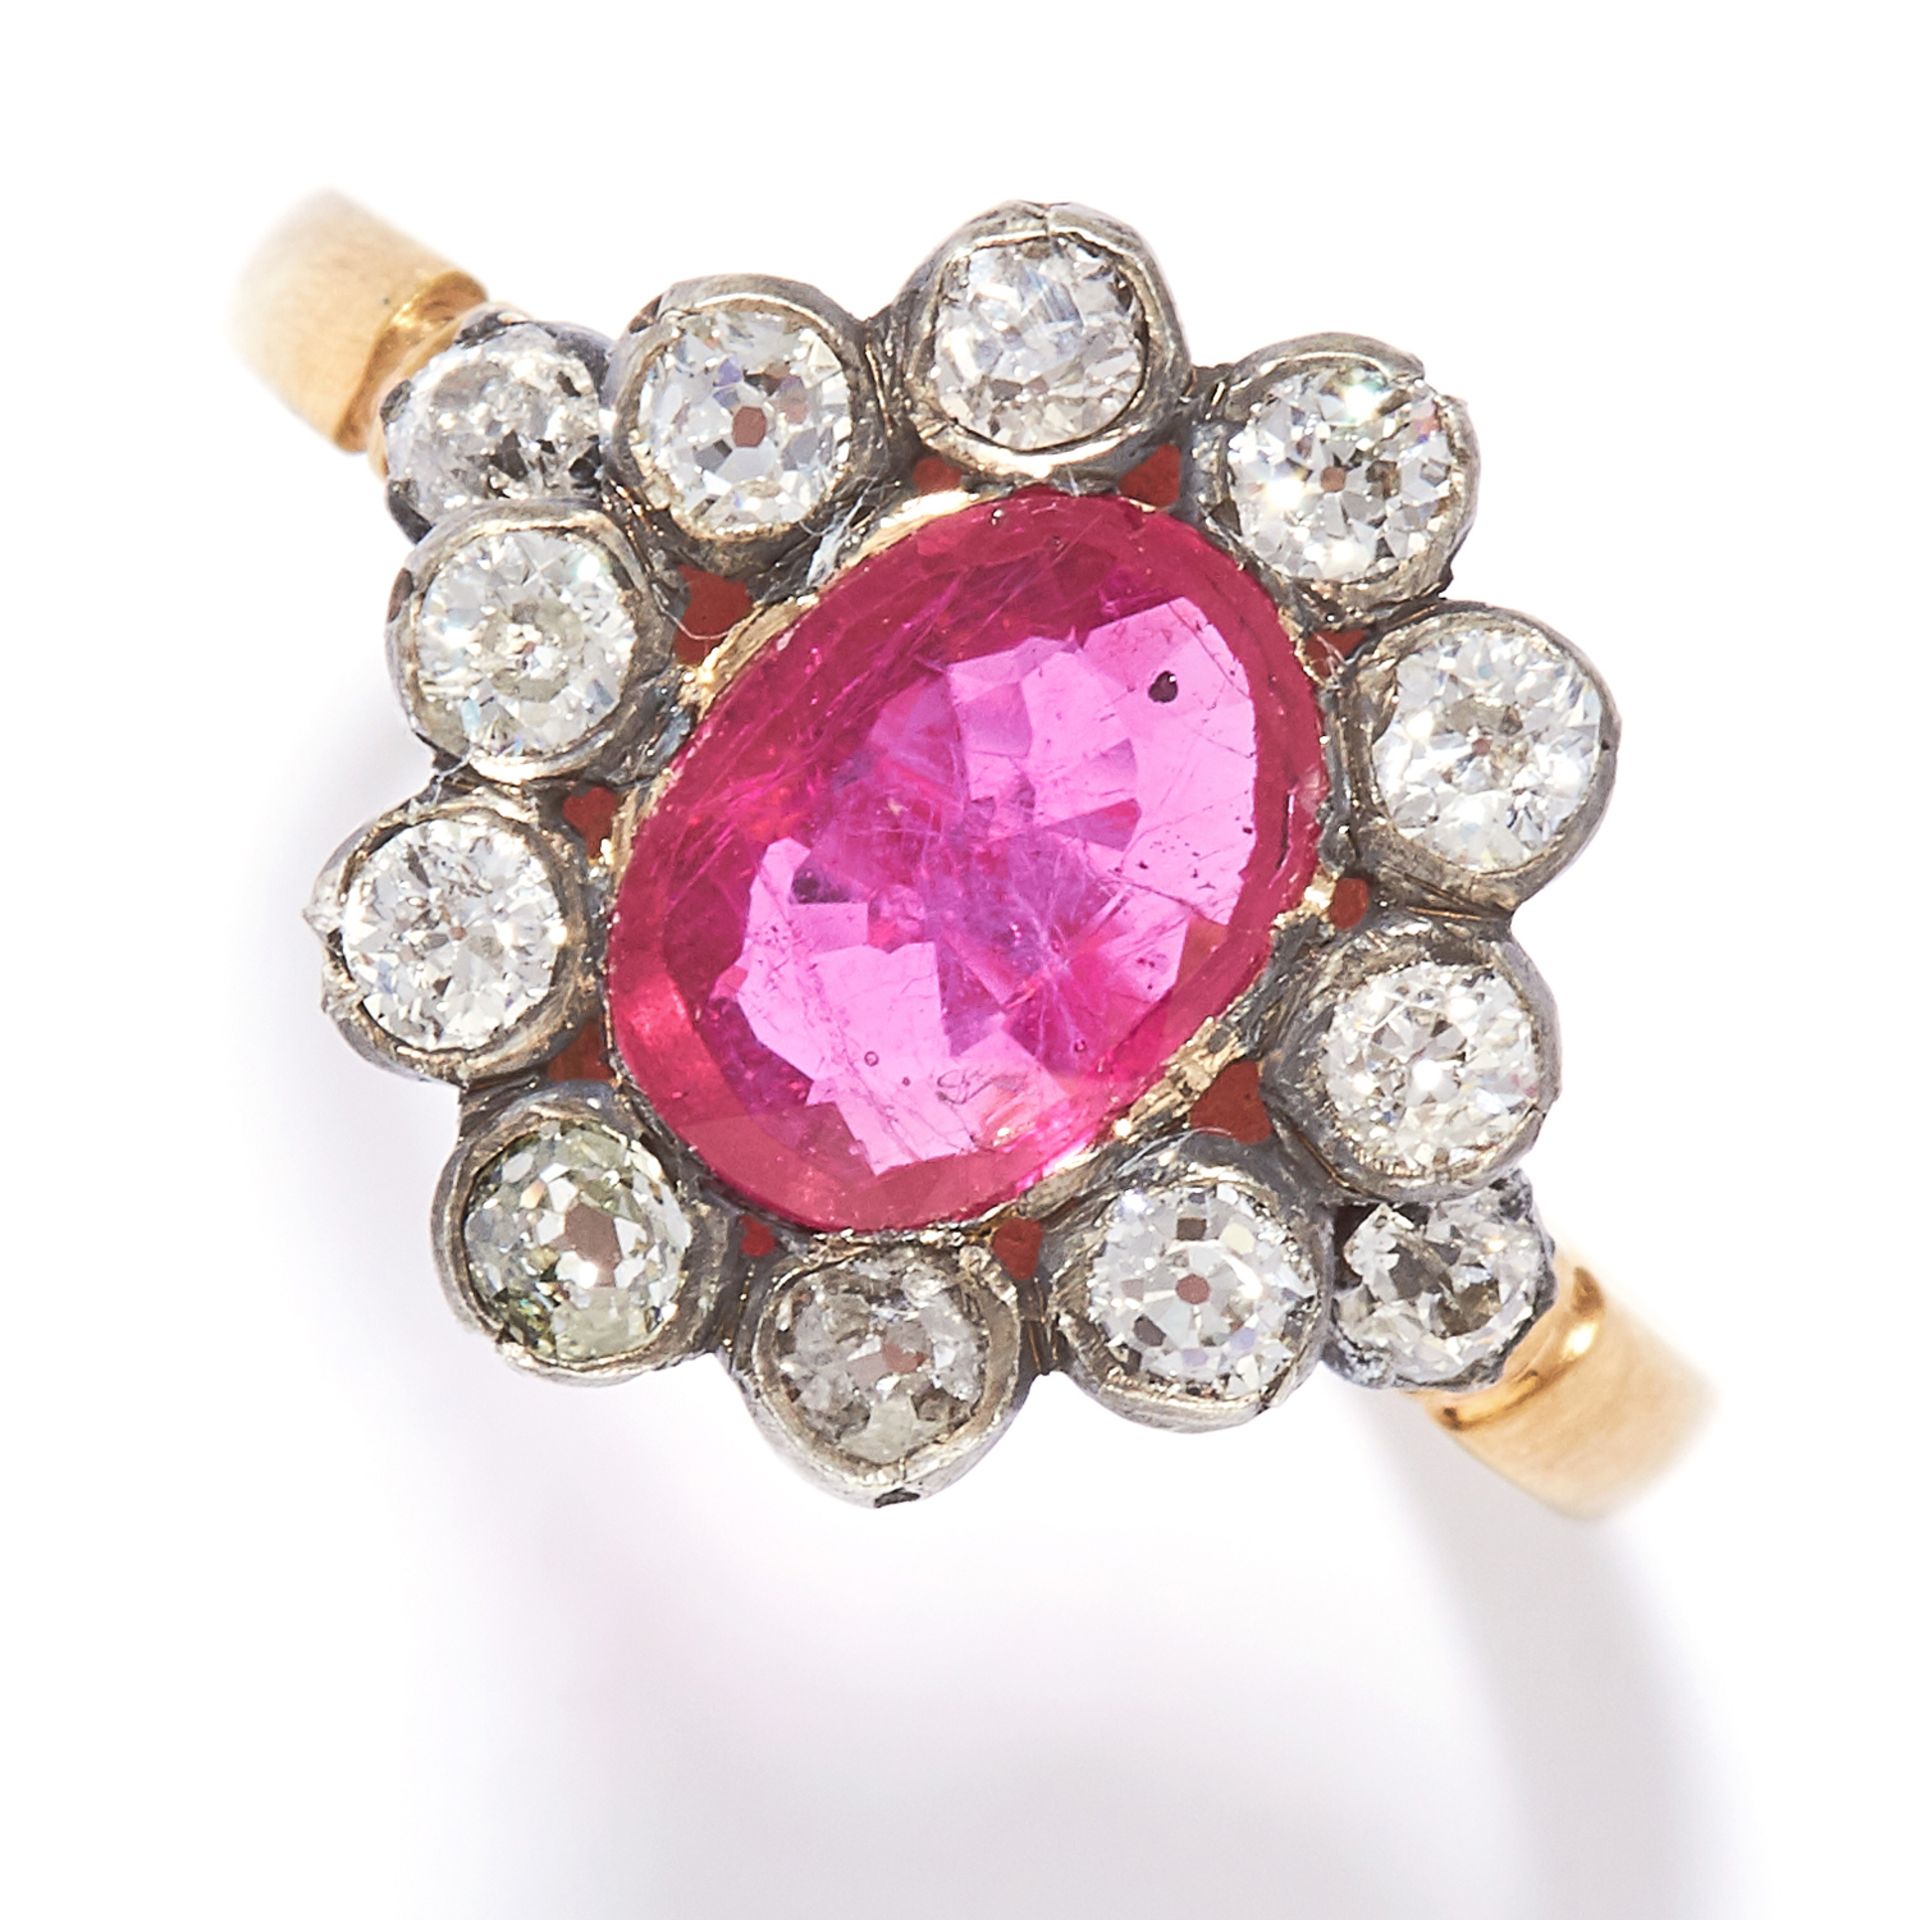 RUBY AND DIAMOND CLUSTER RING in yellow gold, set with an oval cut ruby in a cluster of round cut